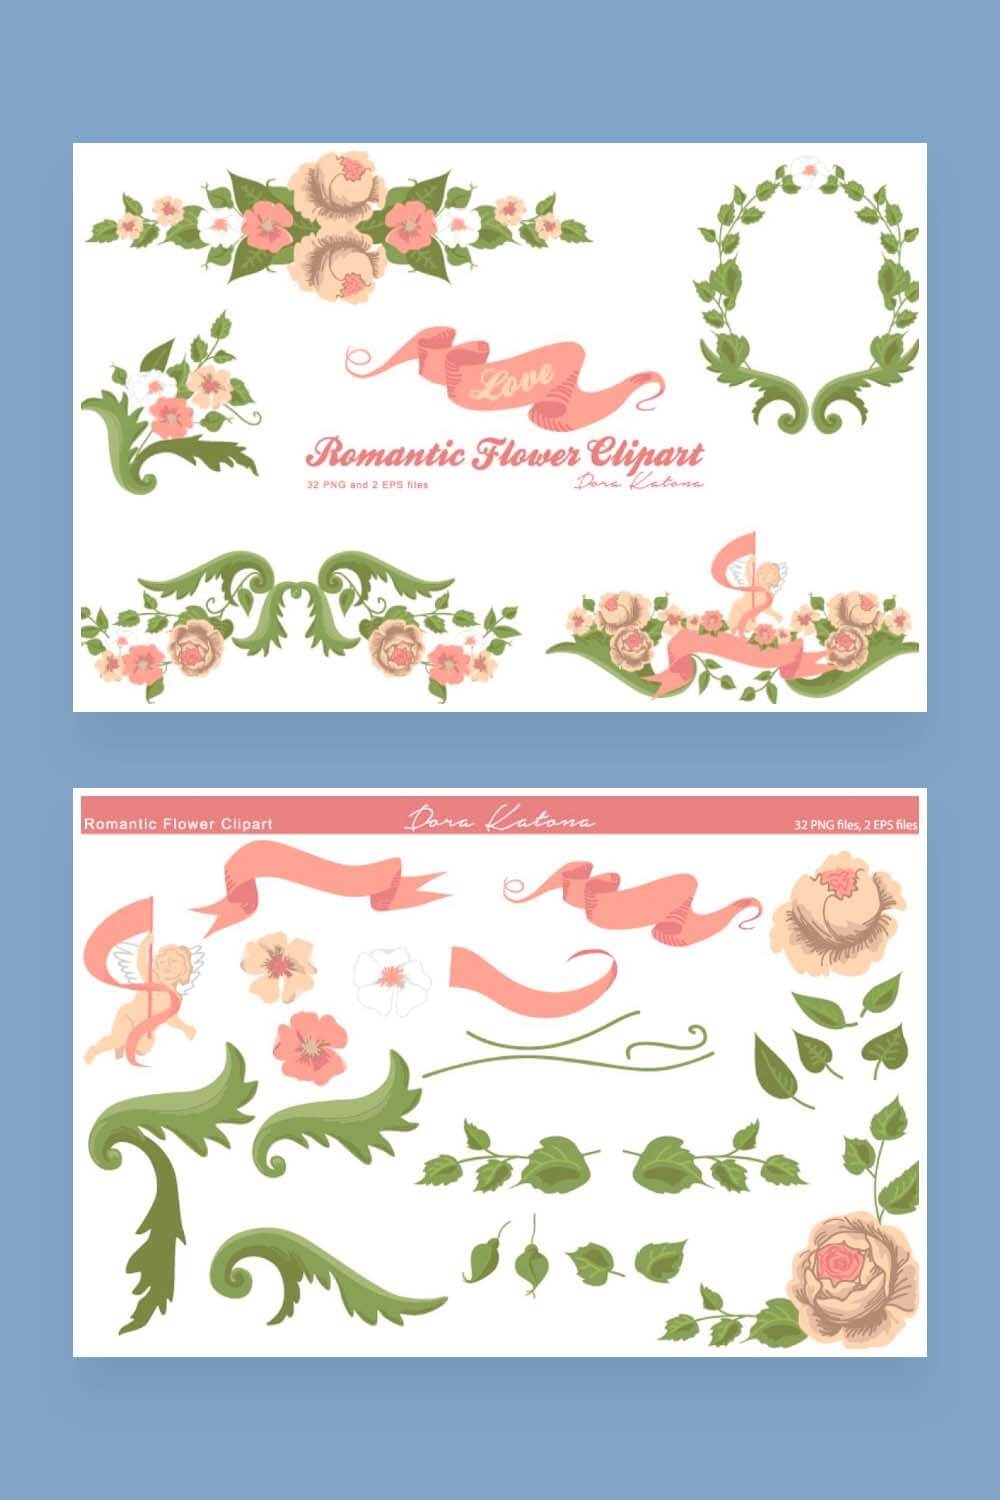 Two images with a set of romantic floral clipart.